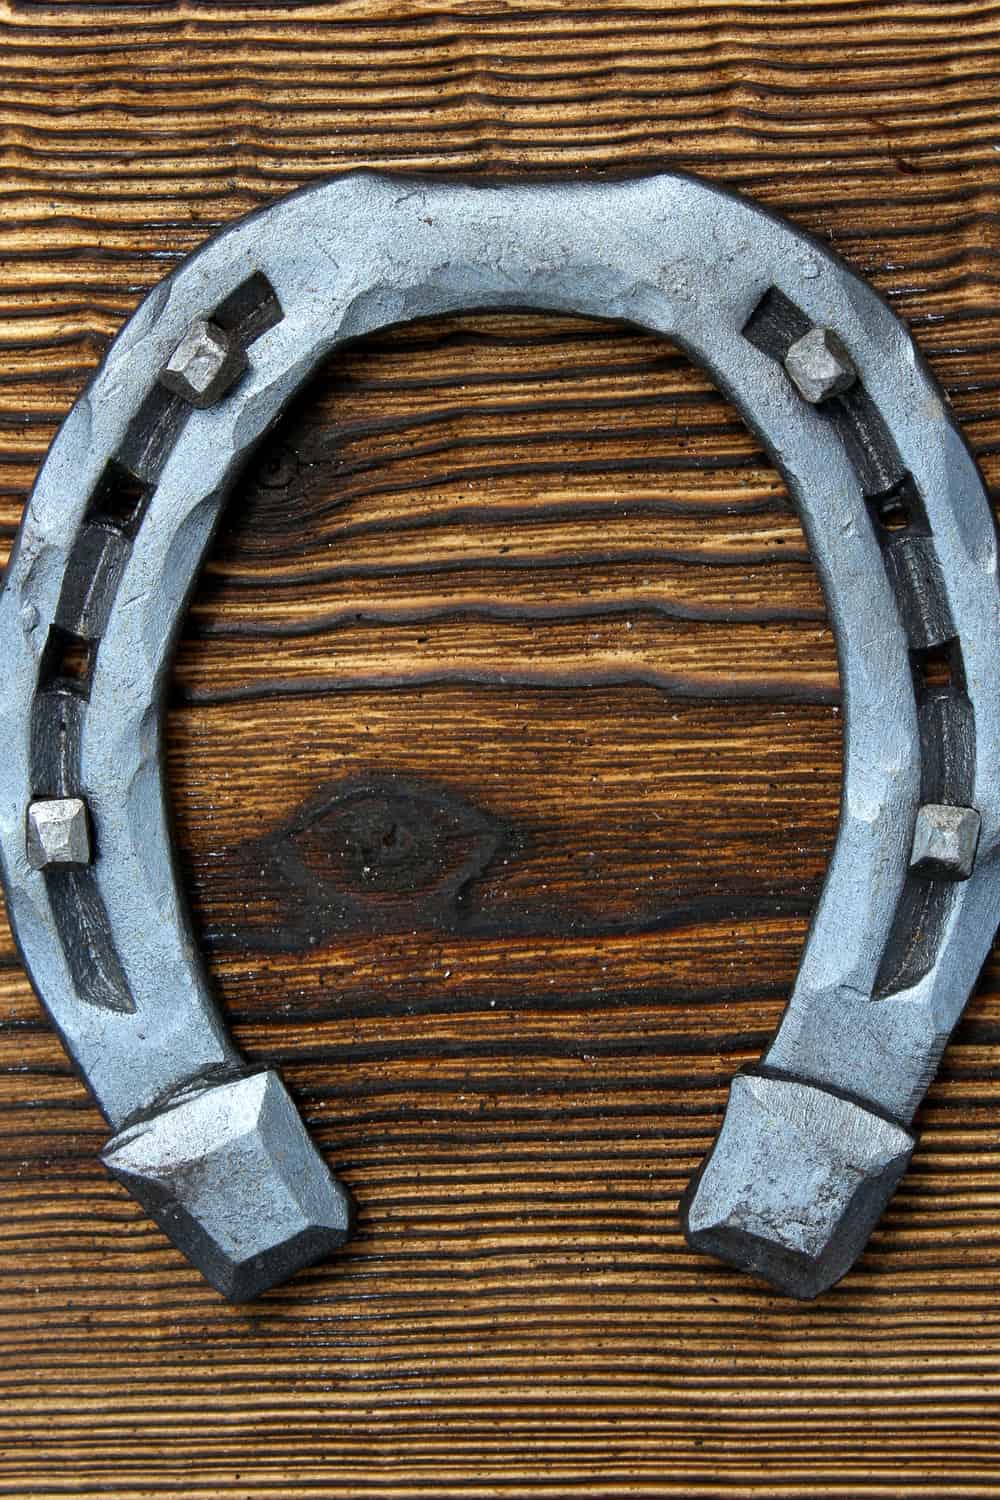 Material Types of Horse Shoes